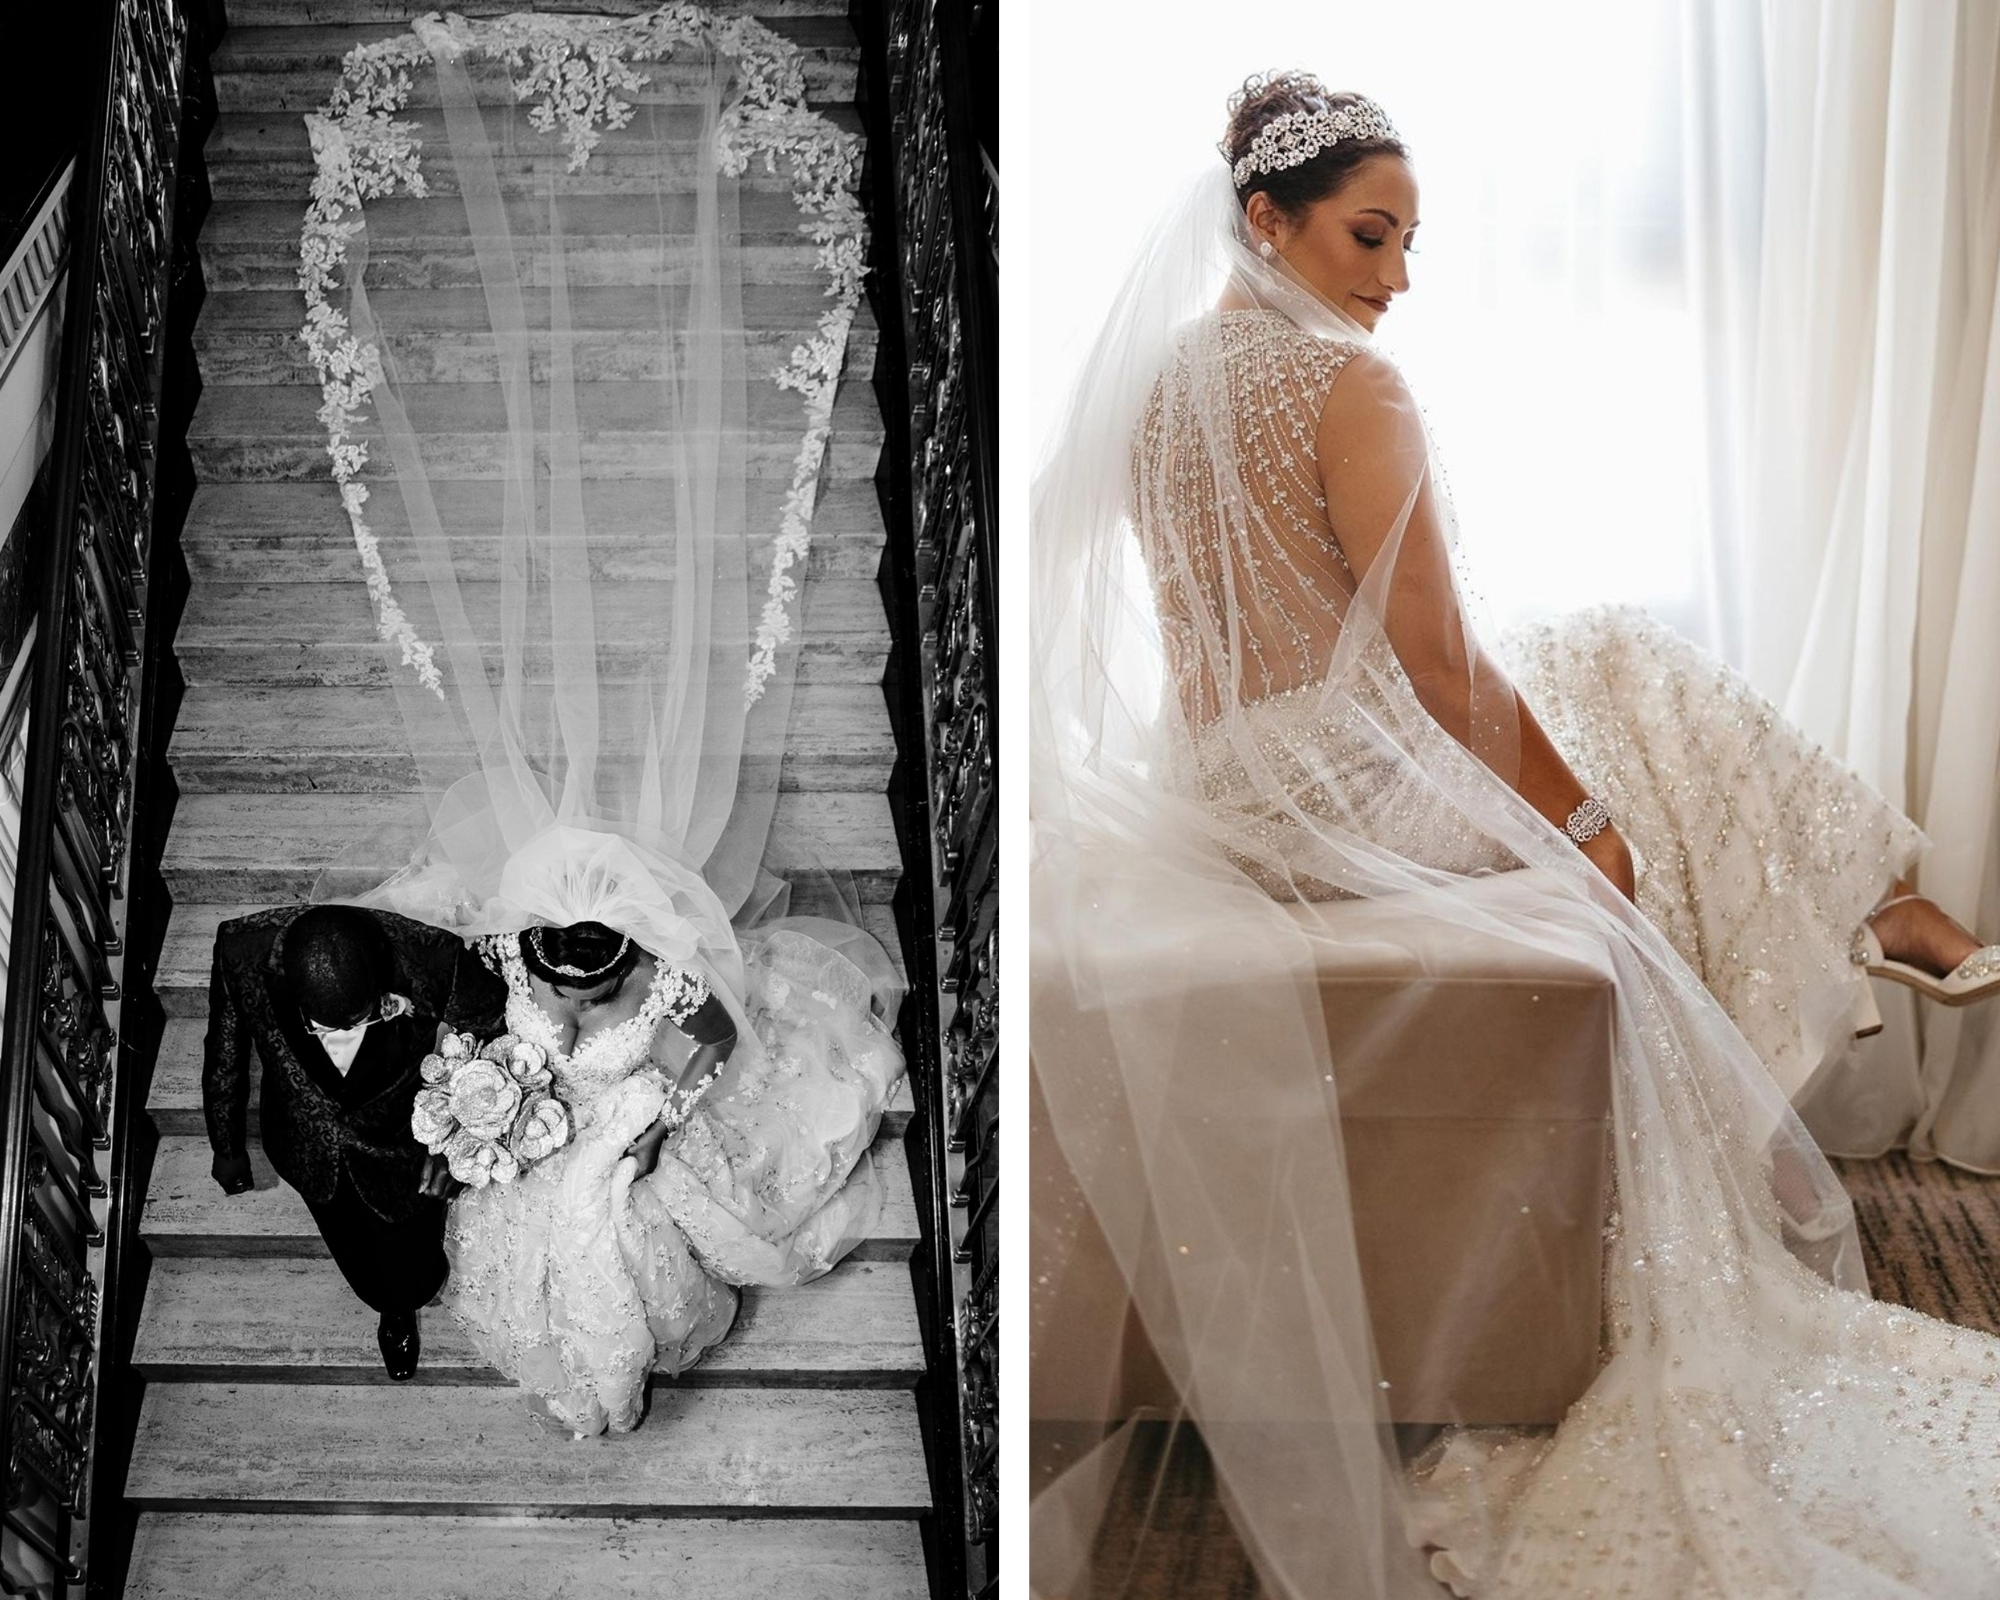 Lace-edged cathedral wedding veils and Swarovski crystal headpieces